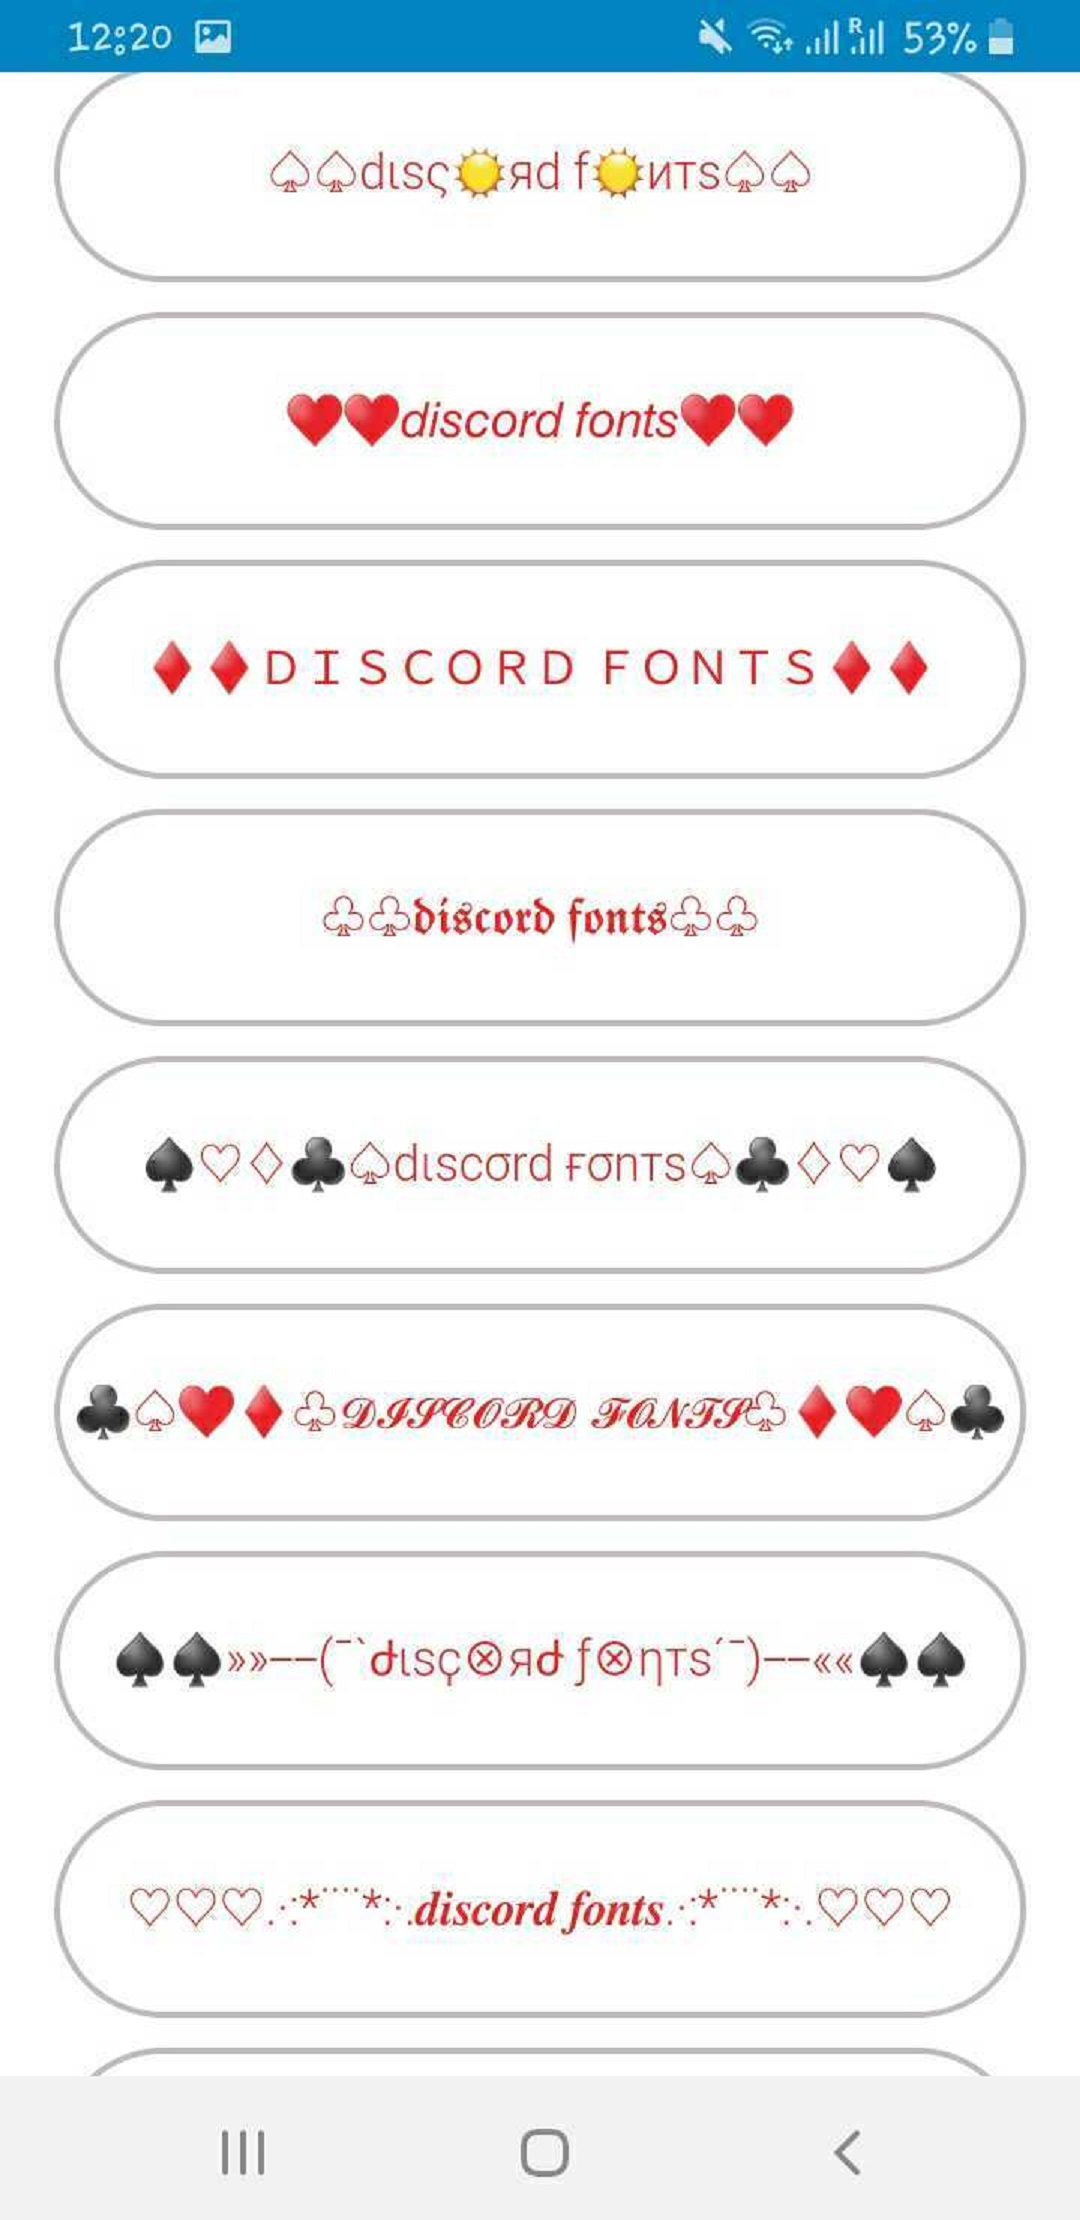 Fonts for Discord